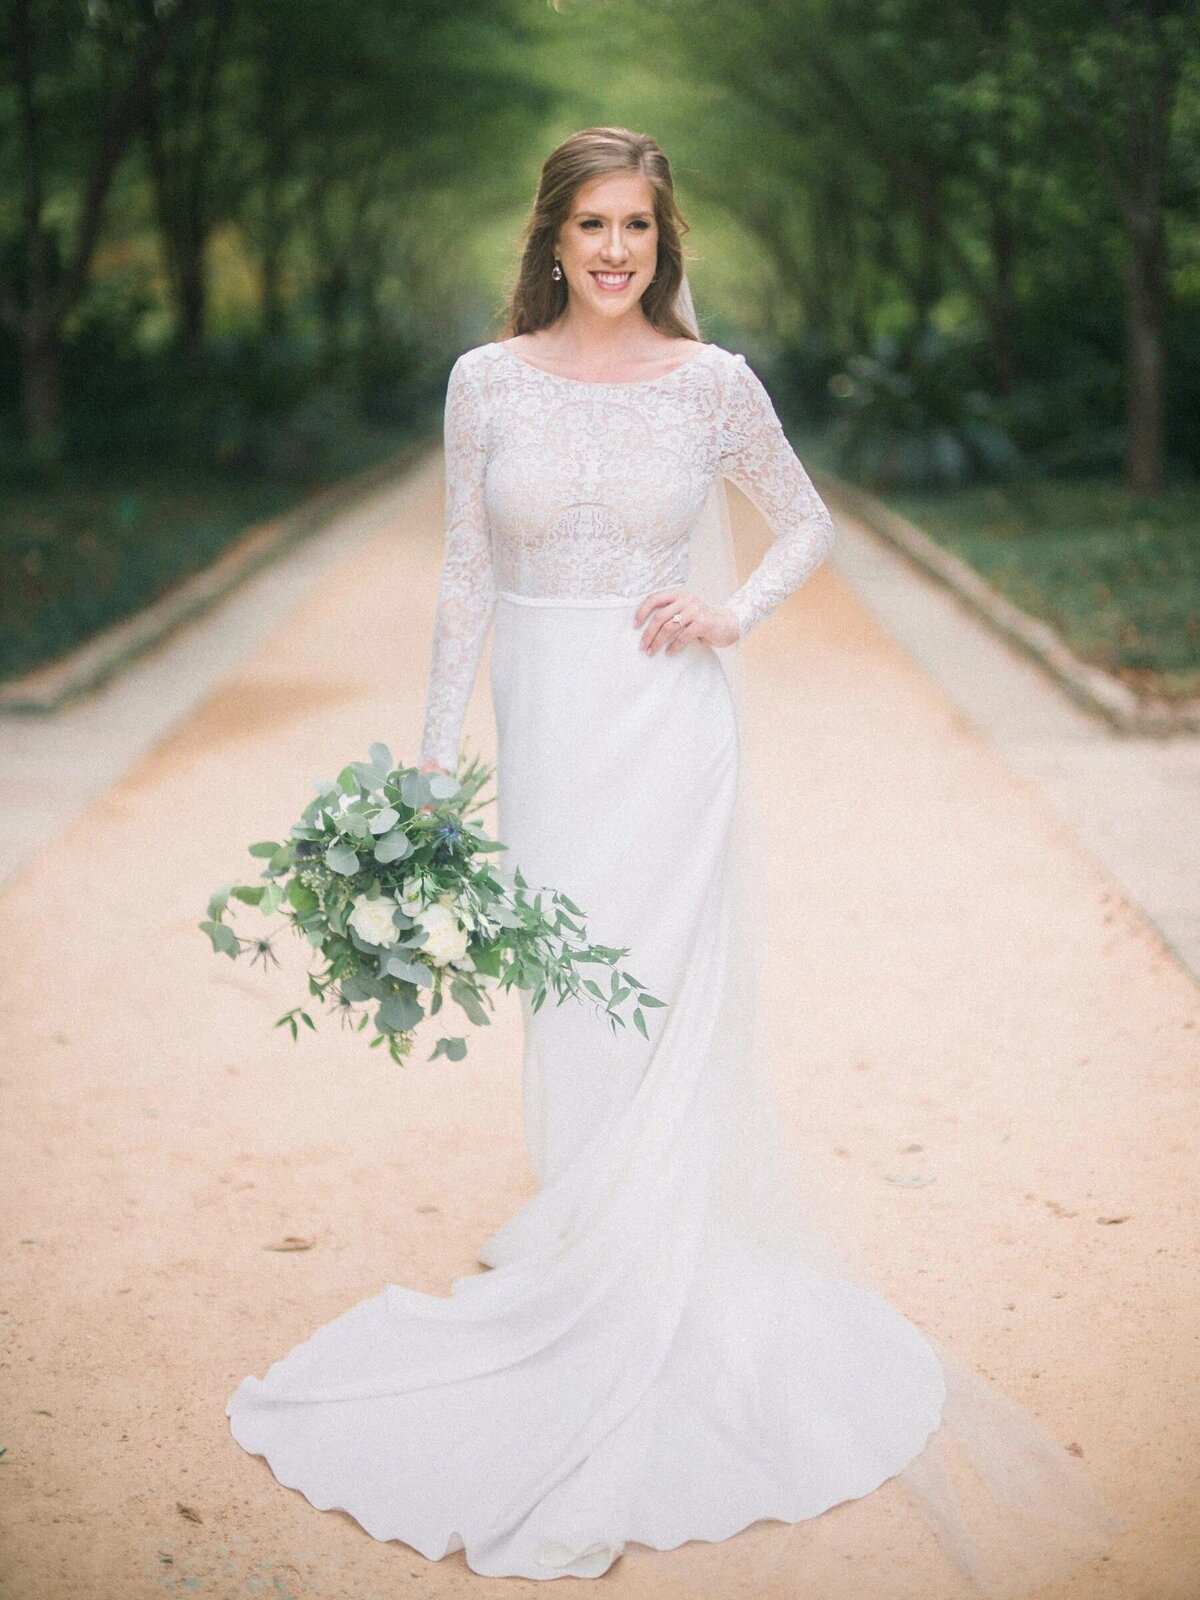 A bride smiling with one hand on her hip and a bouquet in the other